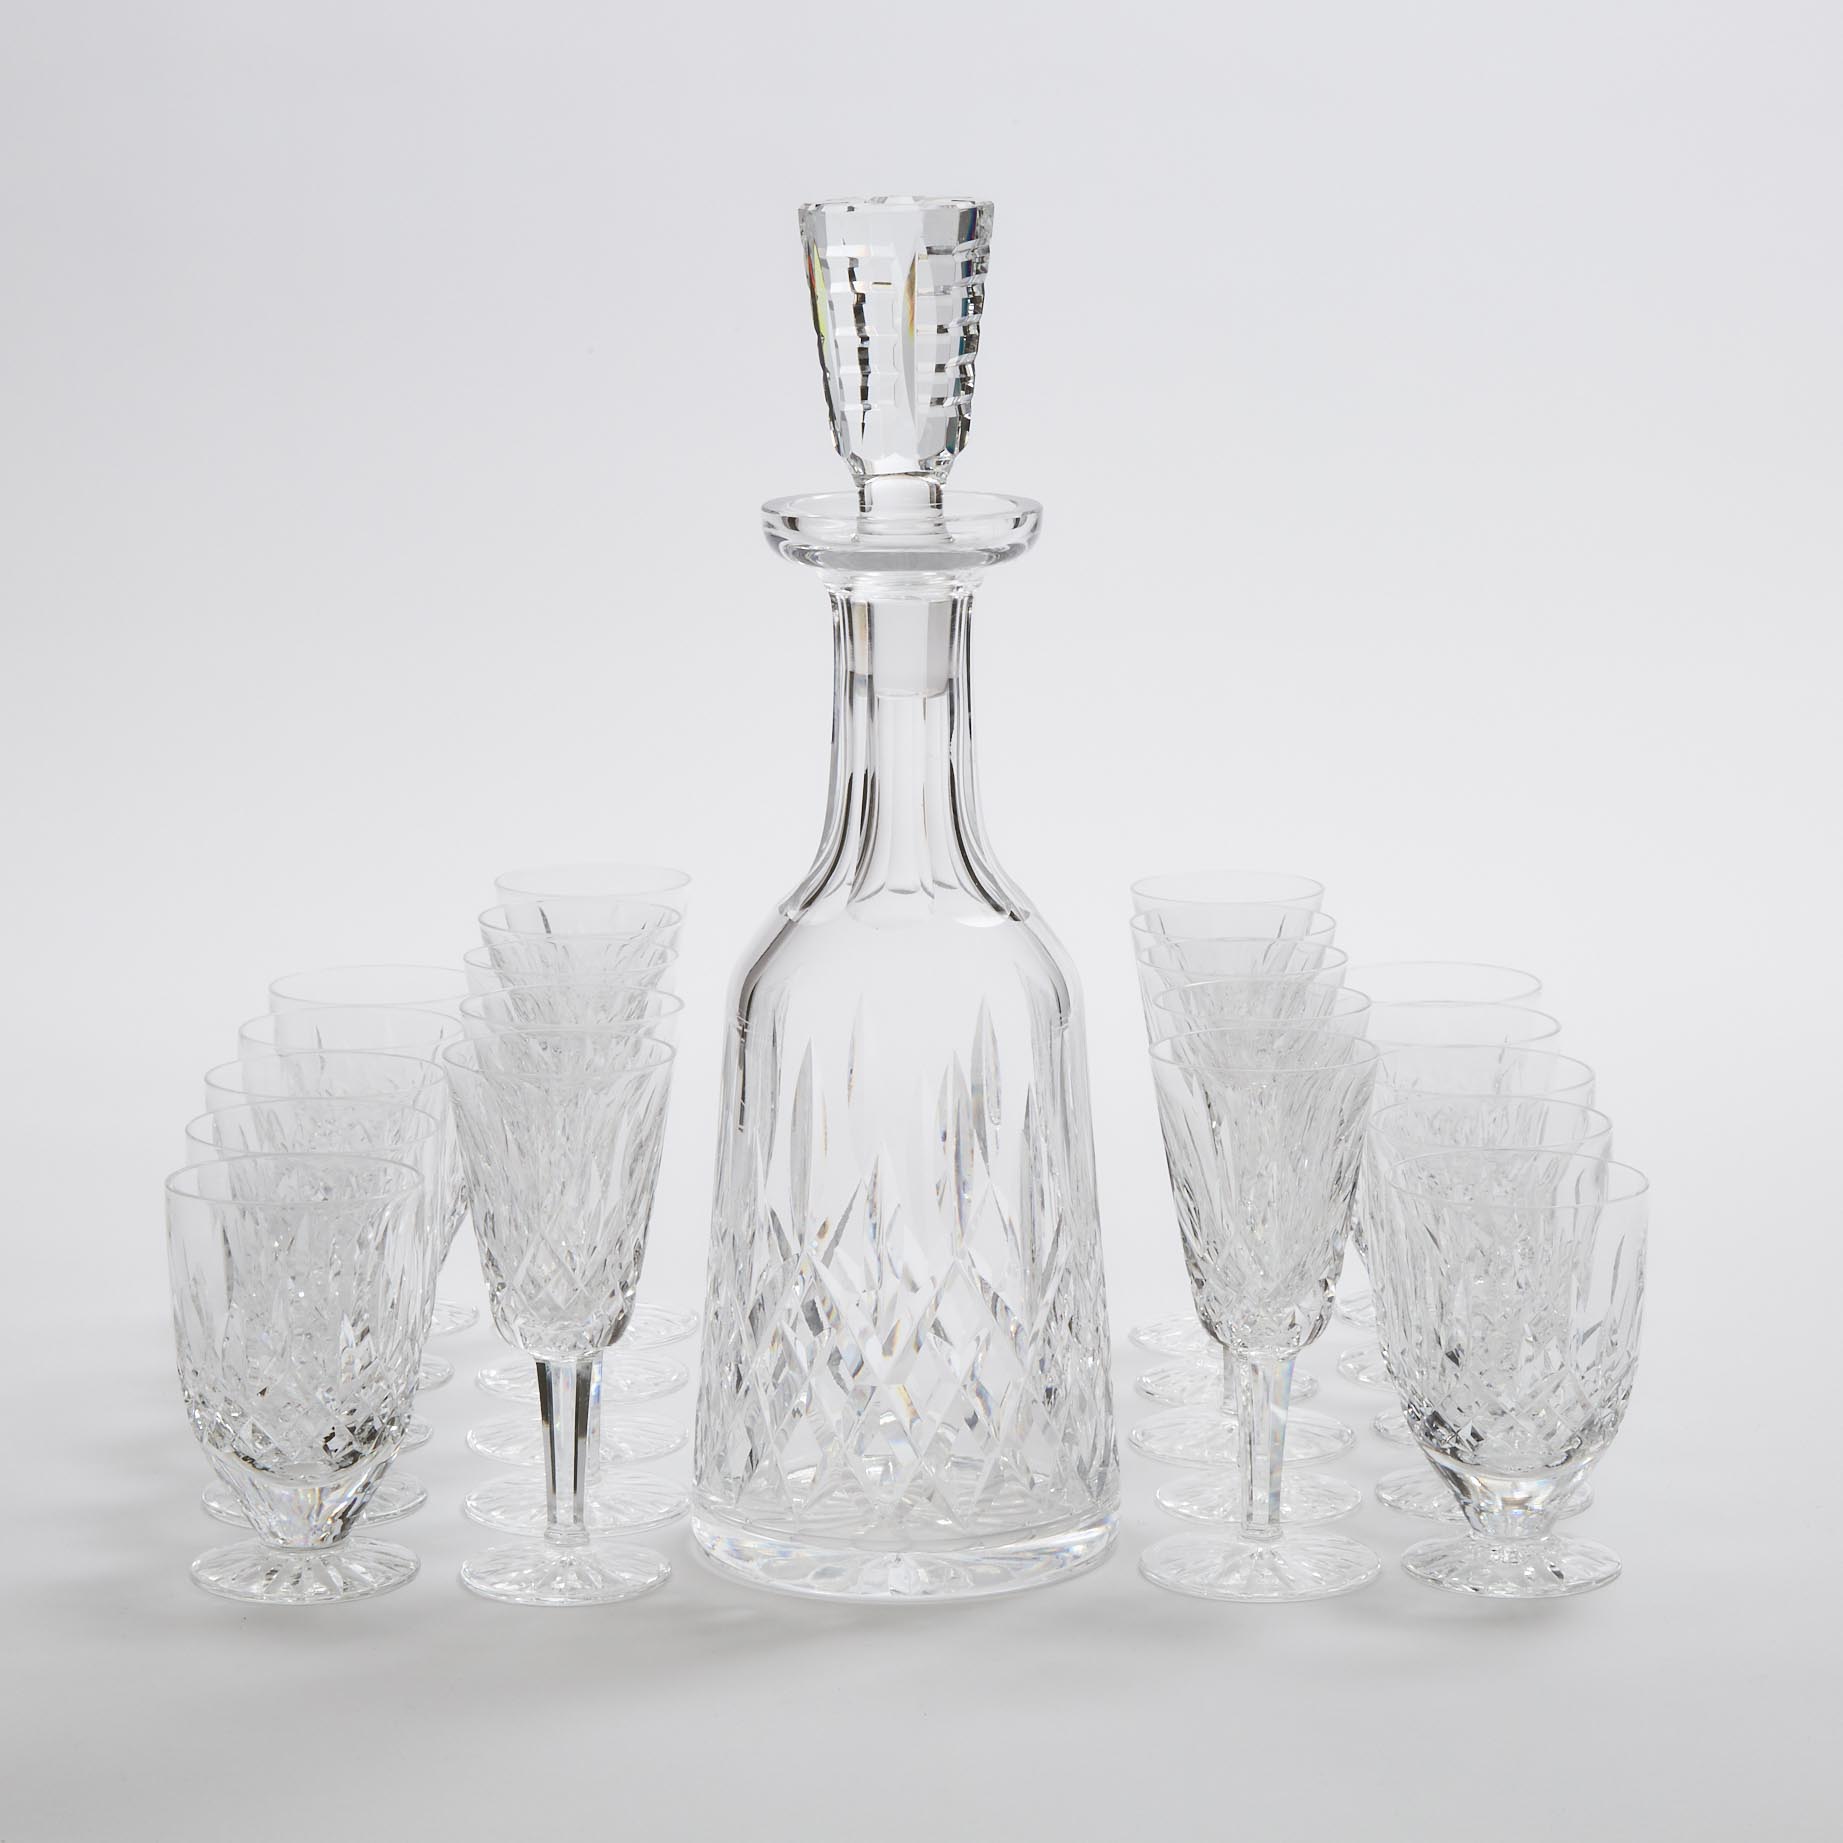 Waterford 'Lismore' Pattern Cut Glass Stemware and Decanter, 20th century